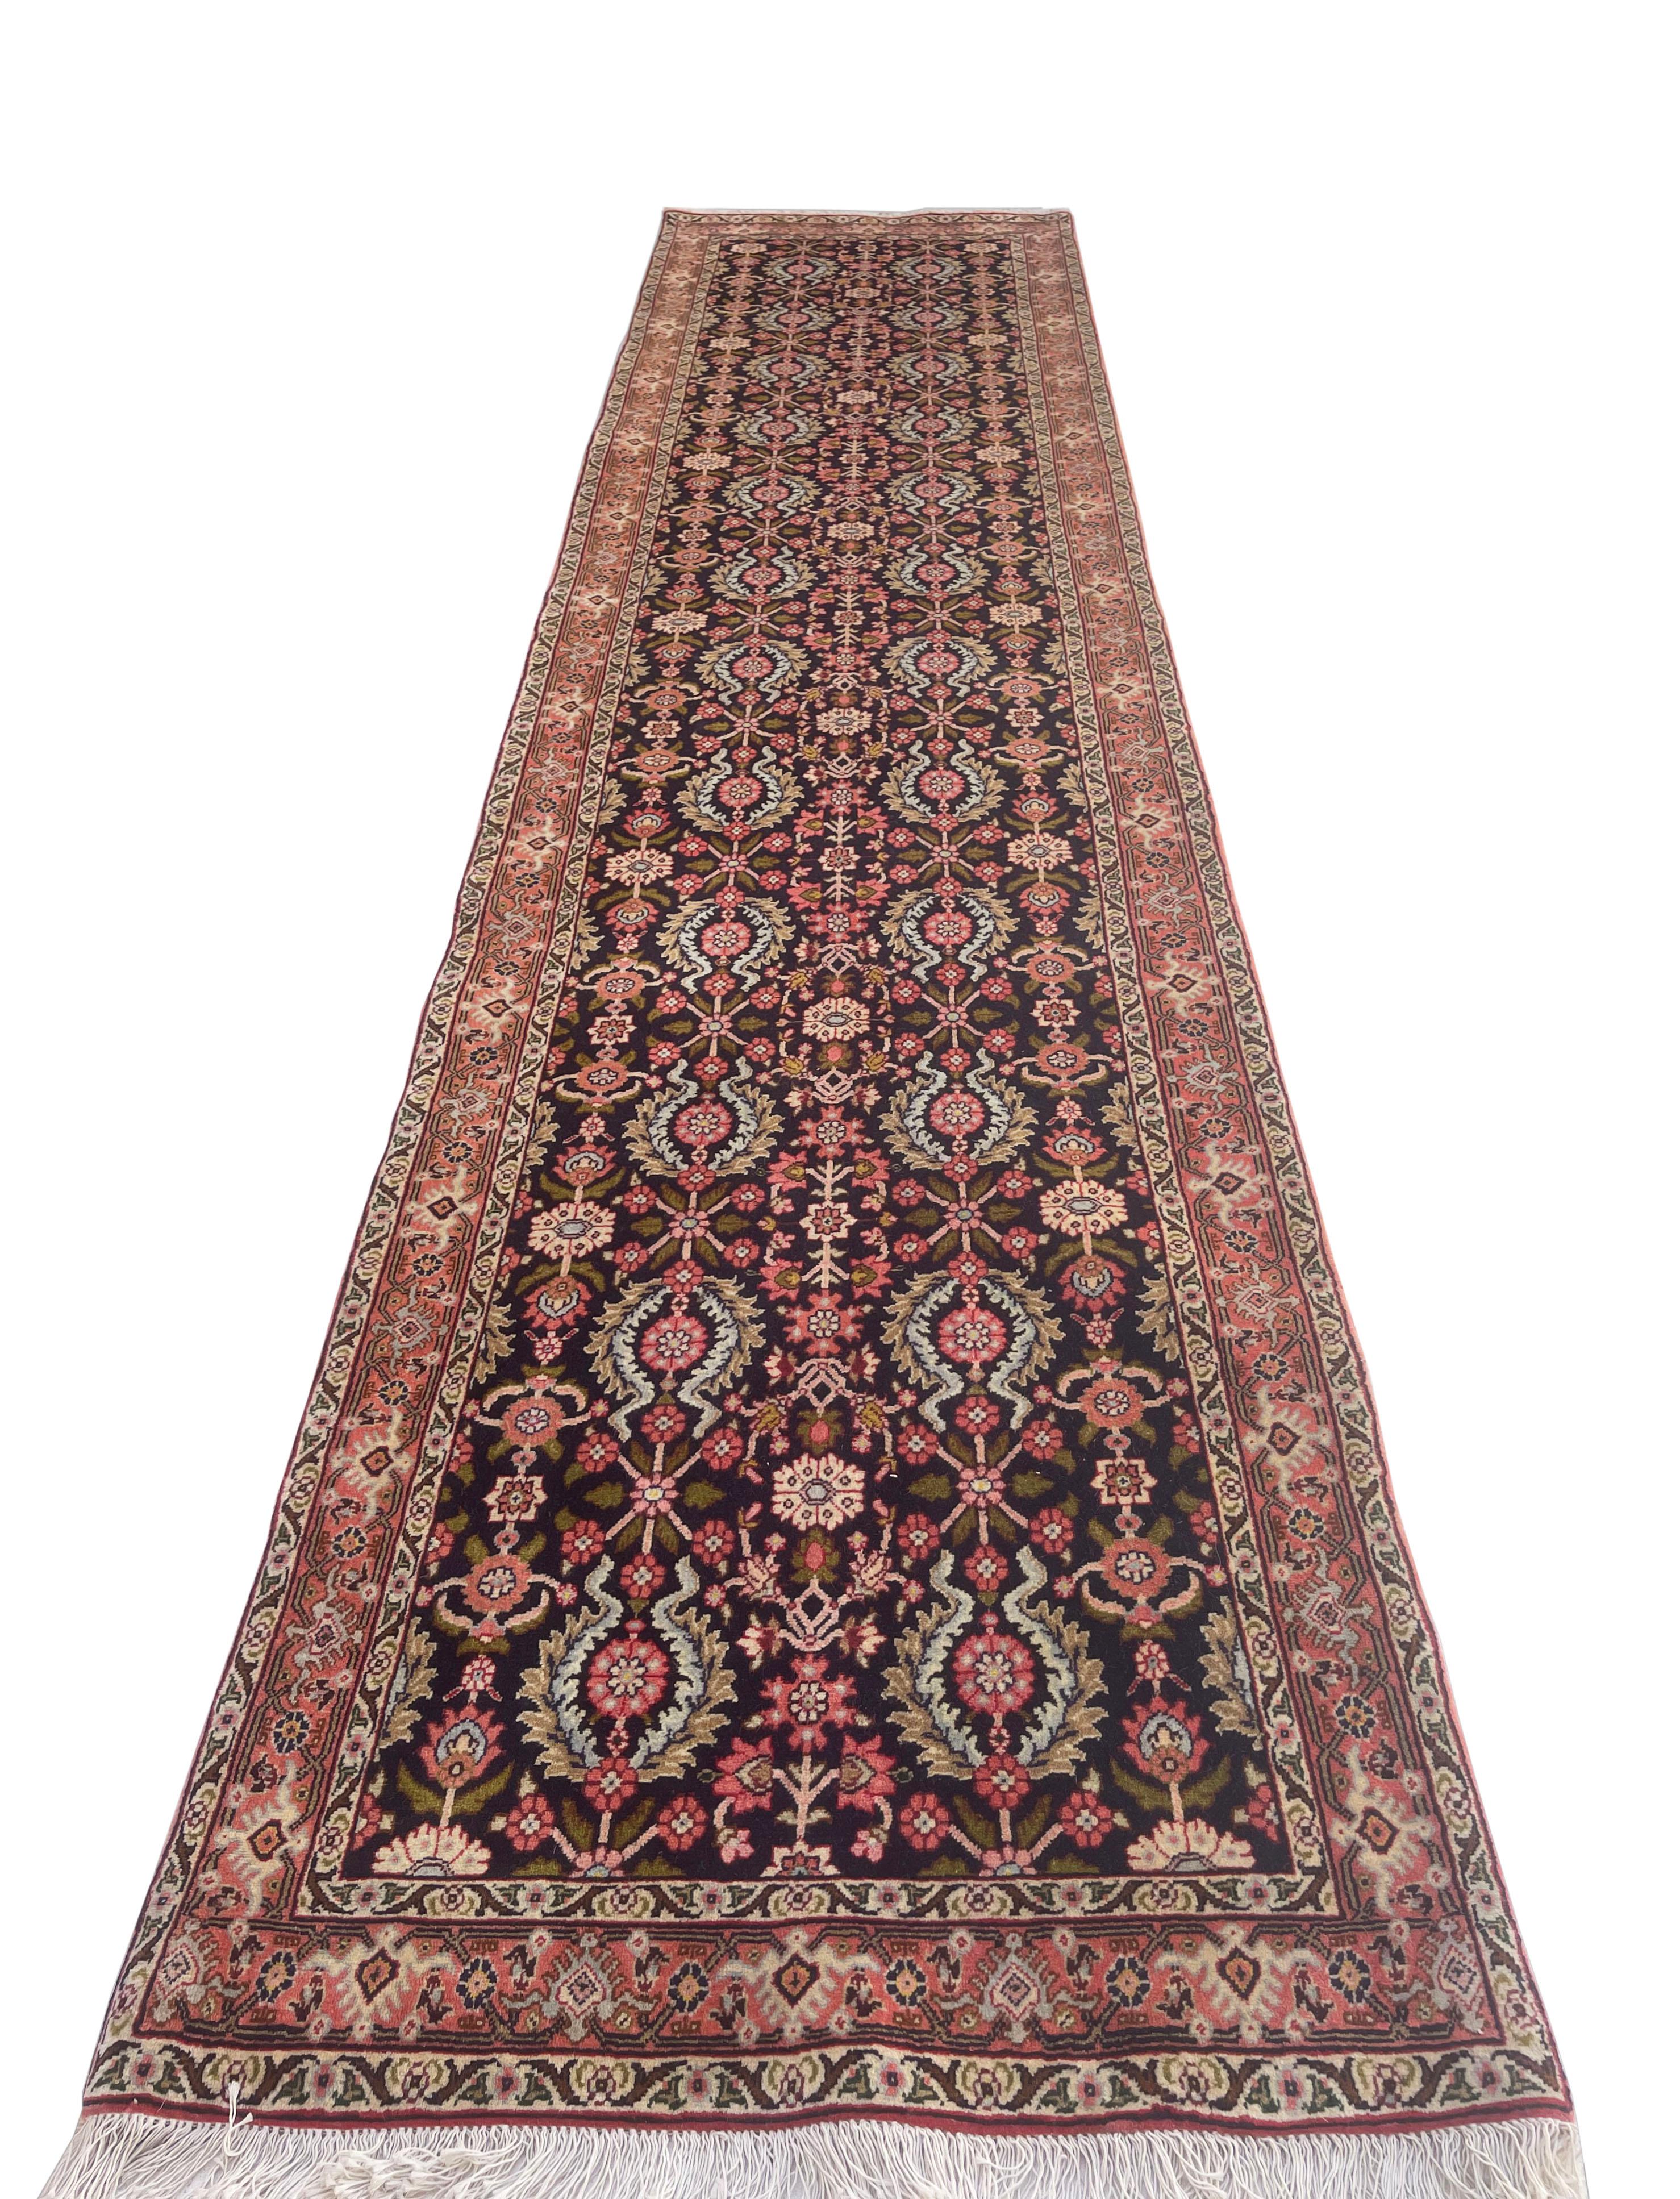 This authentic beautiful over-sized Bijar runner has wool pile and cotton foundation. The rug has repeated all over floral design. The color combination in this piece is dark blue, salmon, cream and green. The size is 2 feet 9 inch wide by 12 feet 4